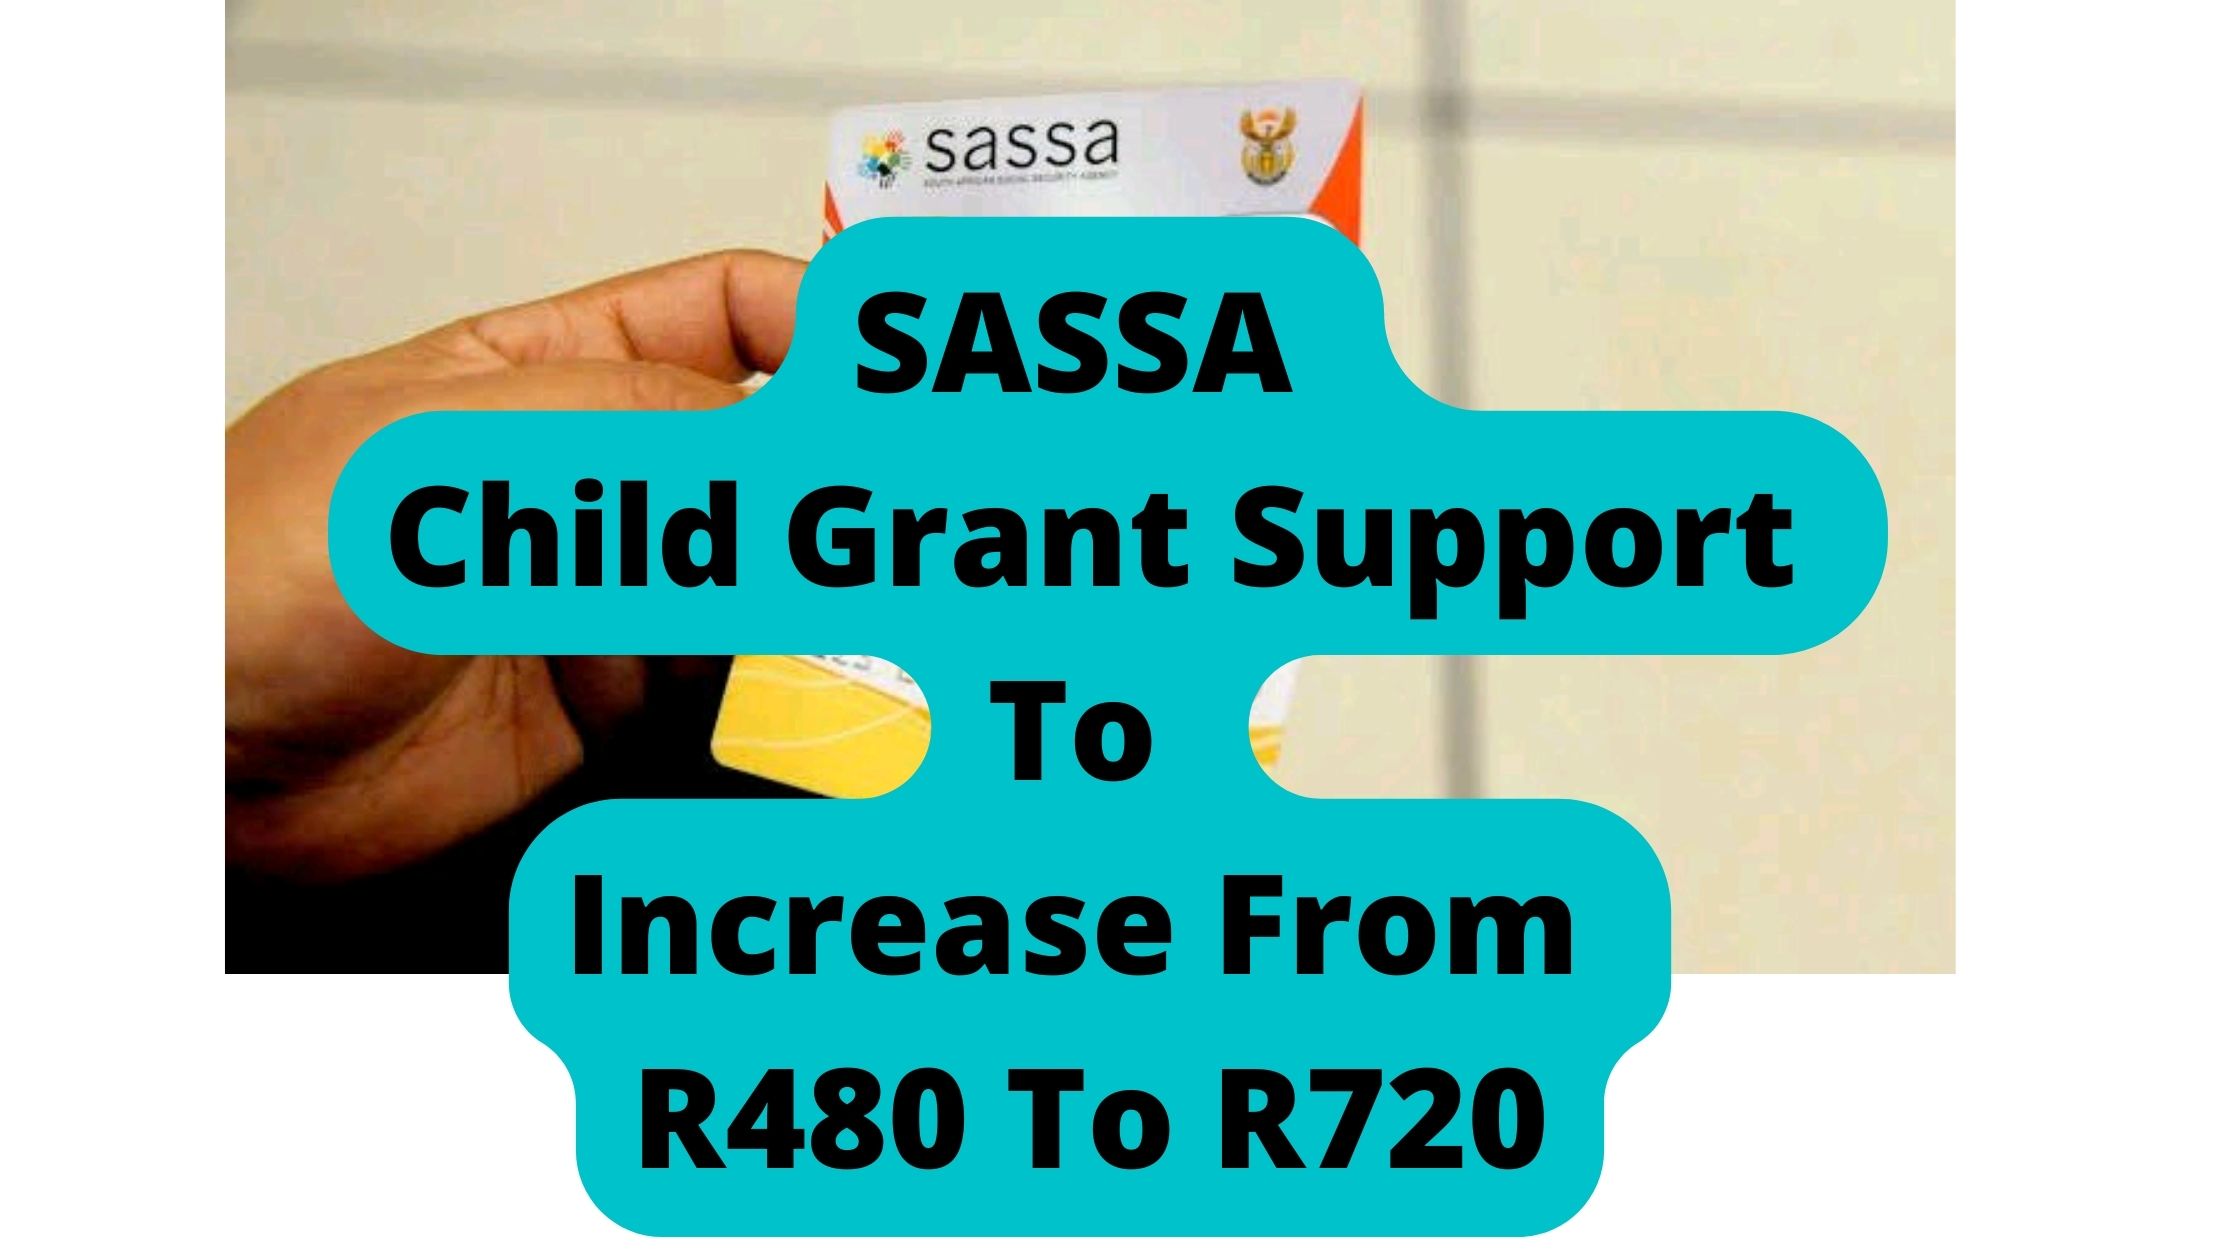 SASSA Child Grant Support To Increase From R480 To R720